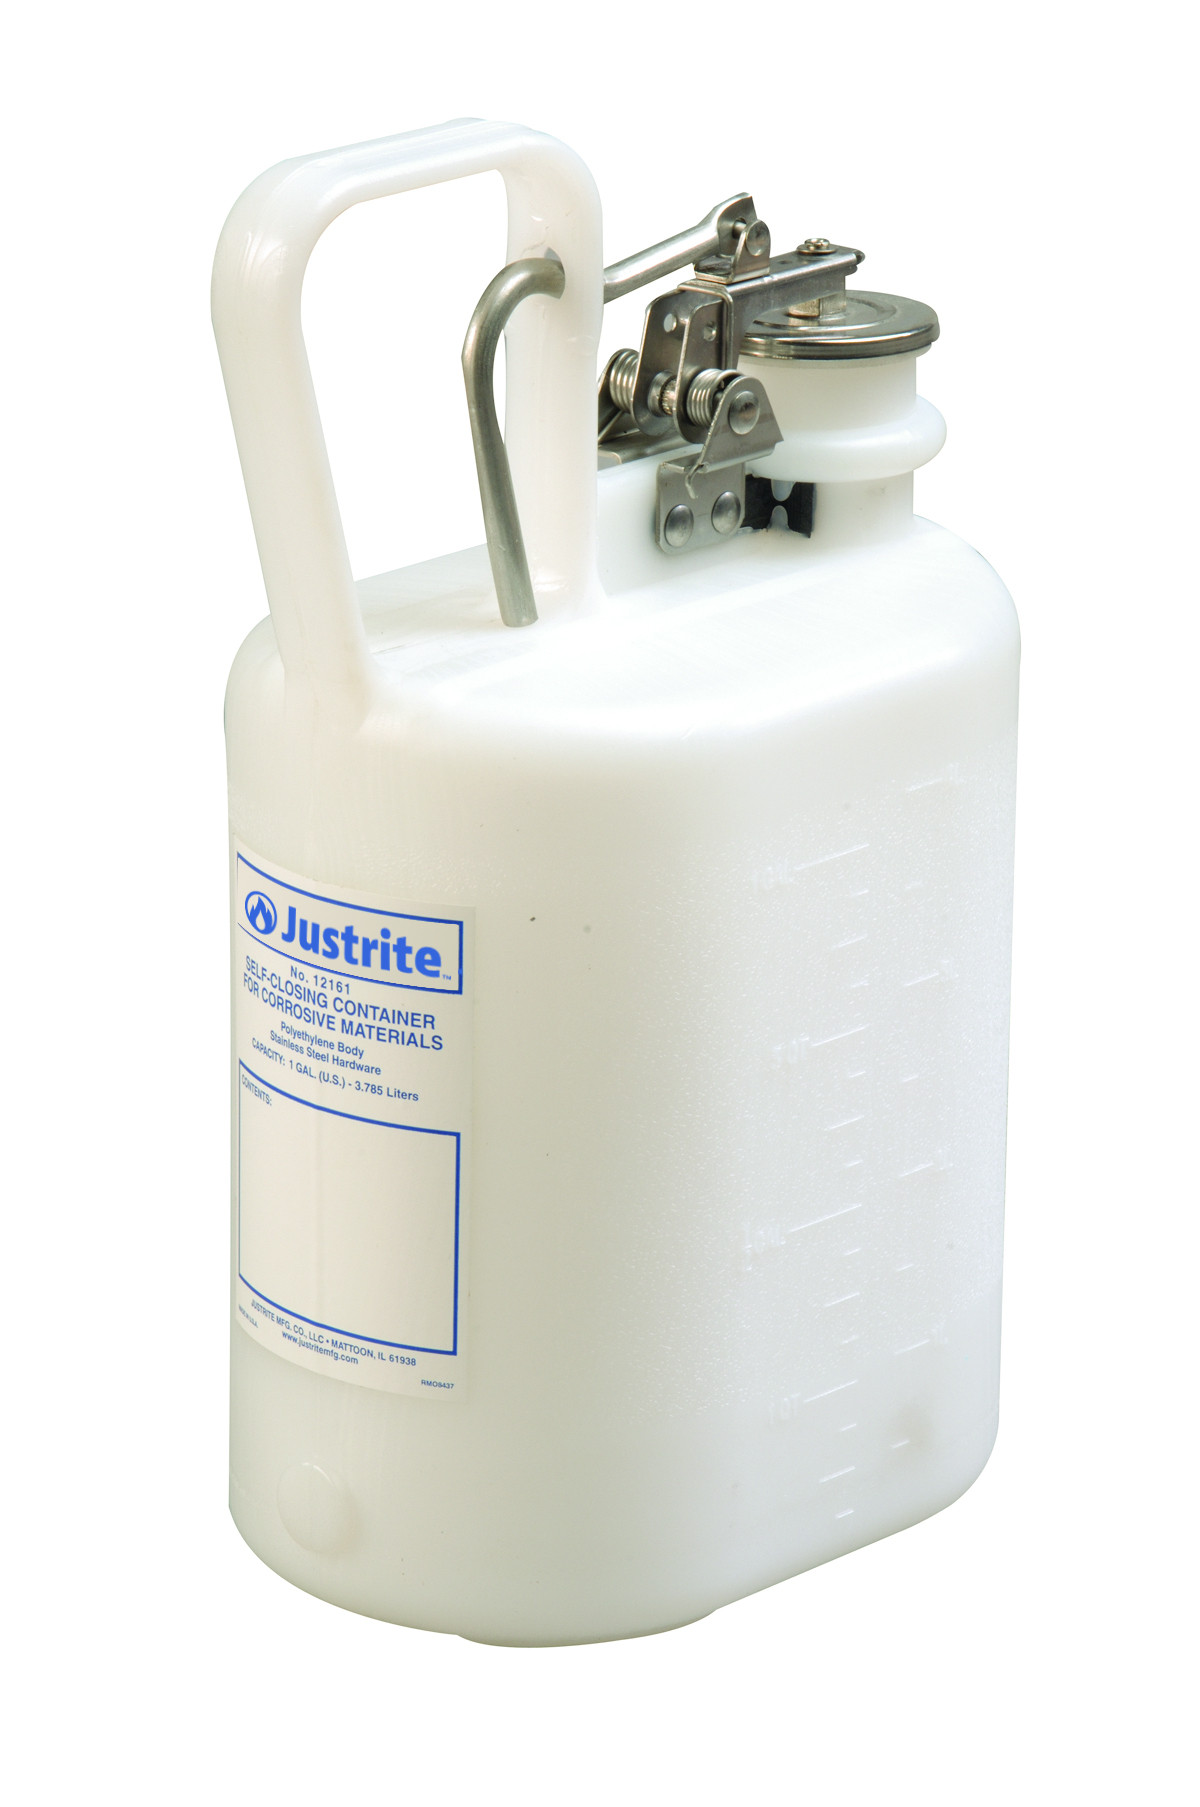 12161_safety-container-1-gallon-white_justrite.jpg